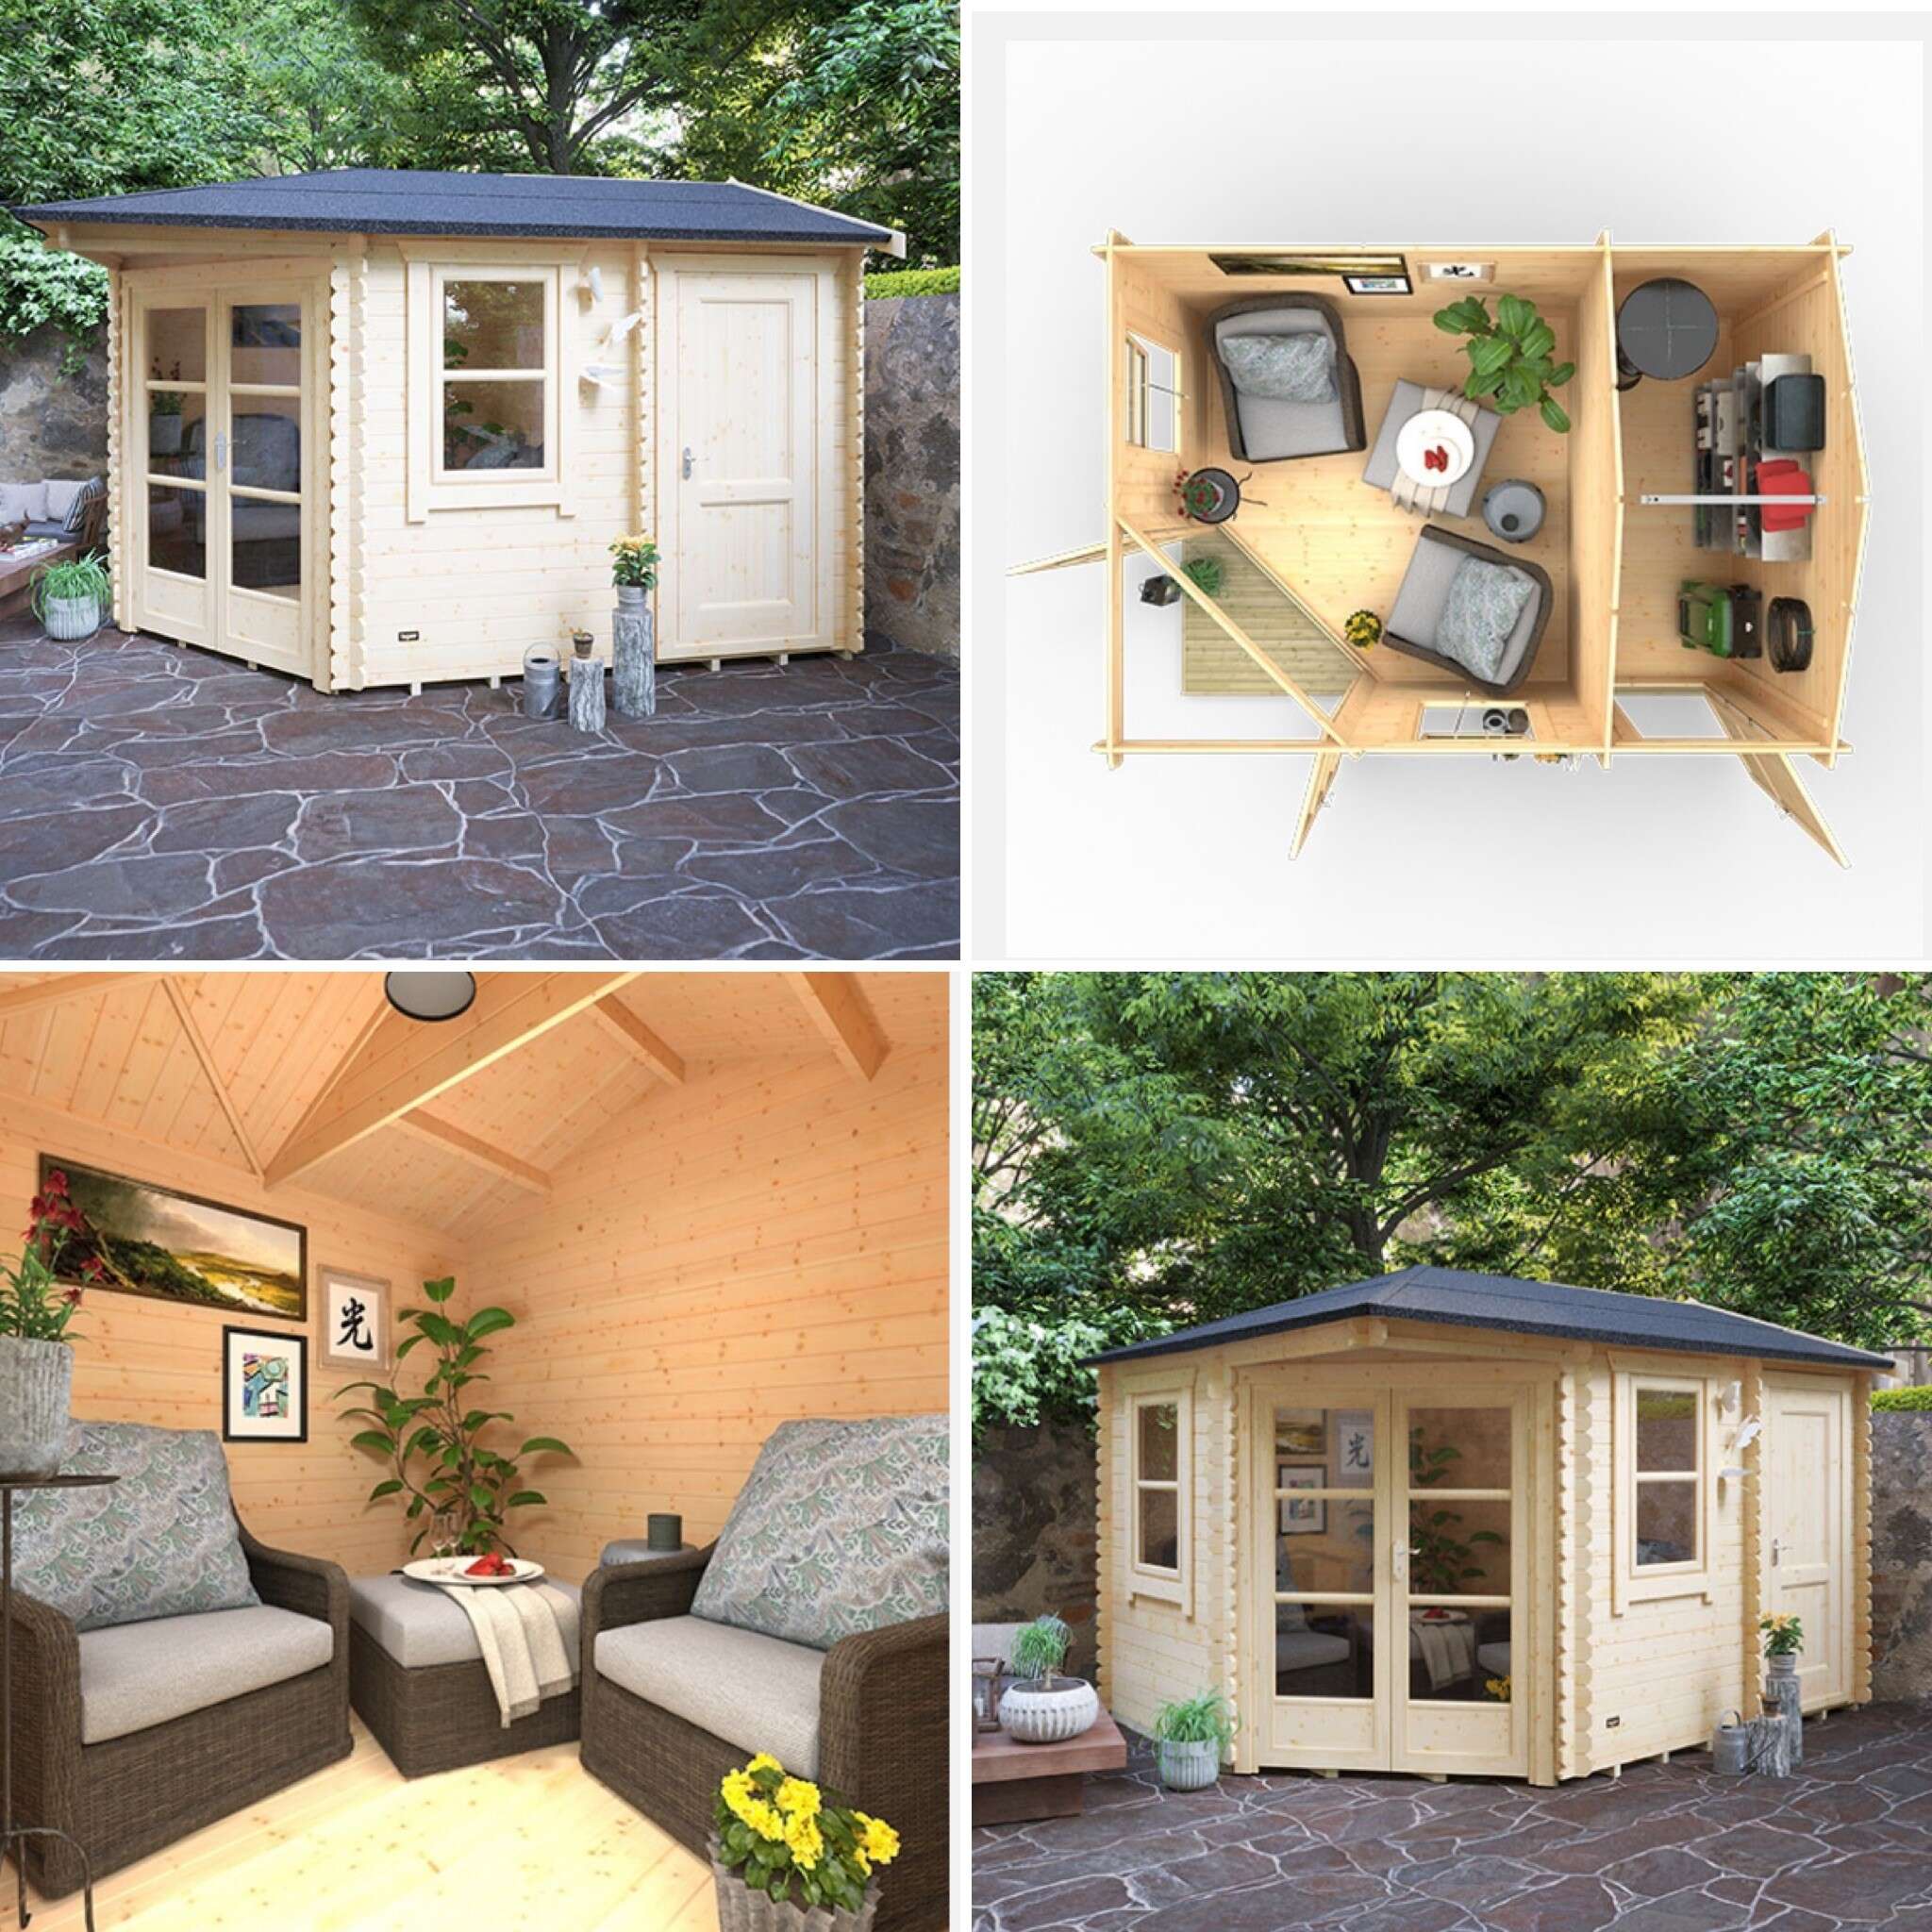 A picture containing multifunctional Tiger Sheds Vibrissa log cabin photo montage of interior and exterior, garden room and storage room combined in log cabin